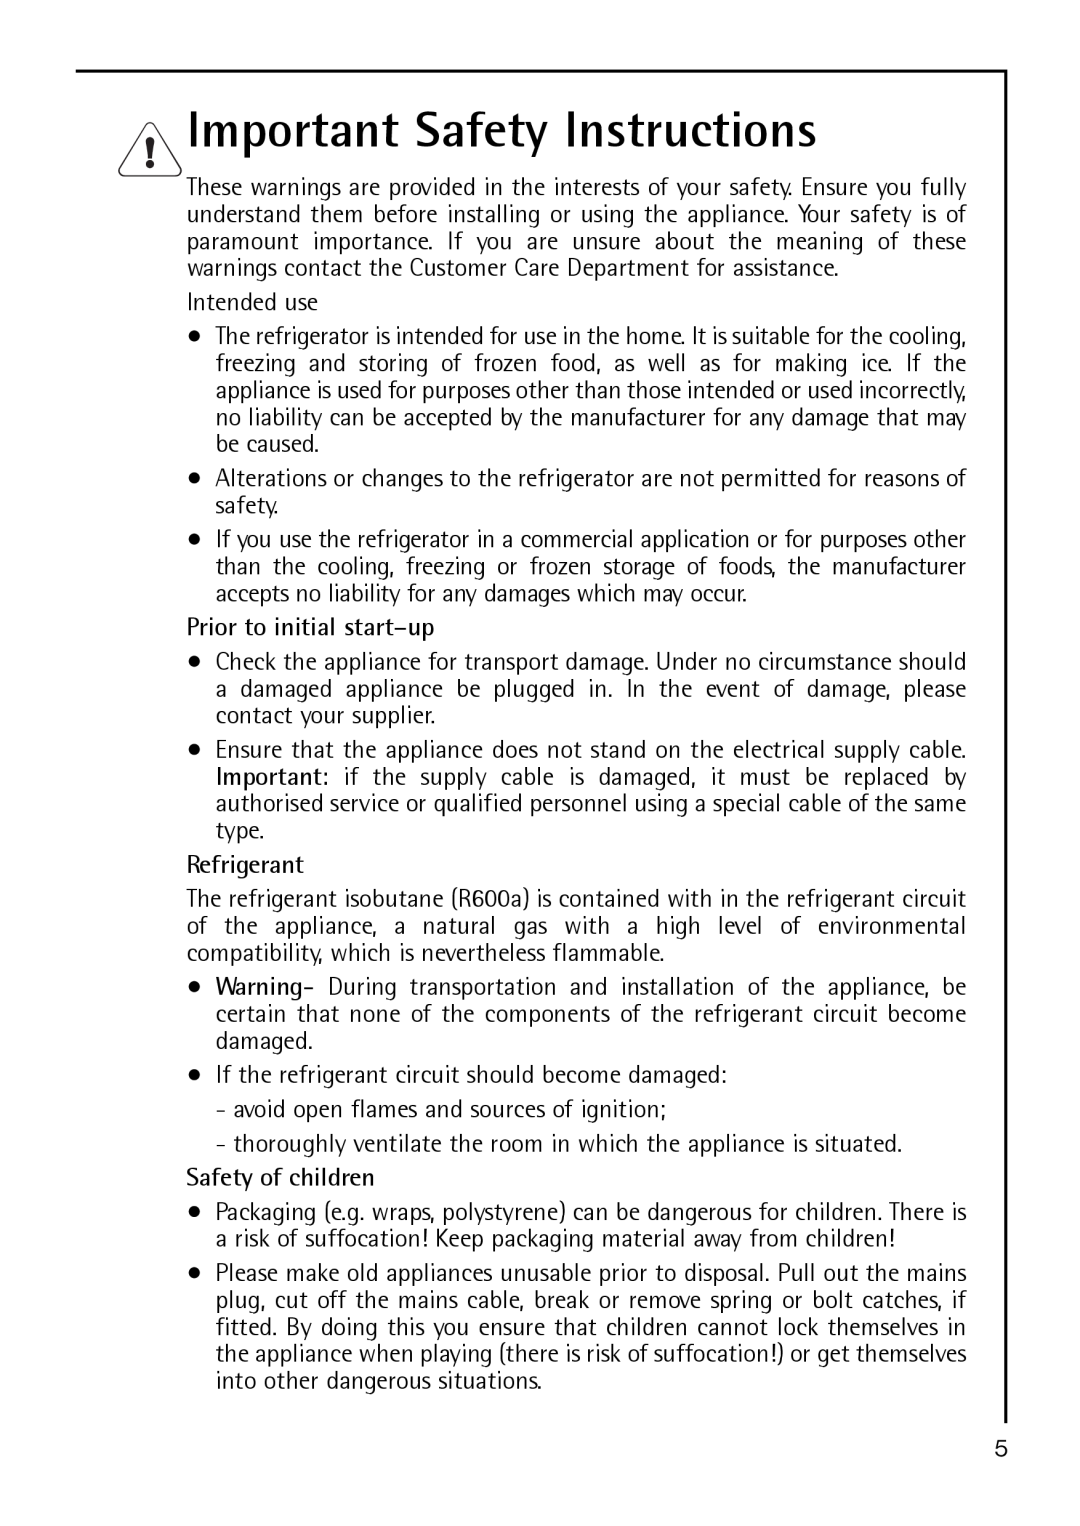 AEG S 60150 TK manual Important Safety Instructions, Prior to initial start-up, Refrigerant, Safety of children 